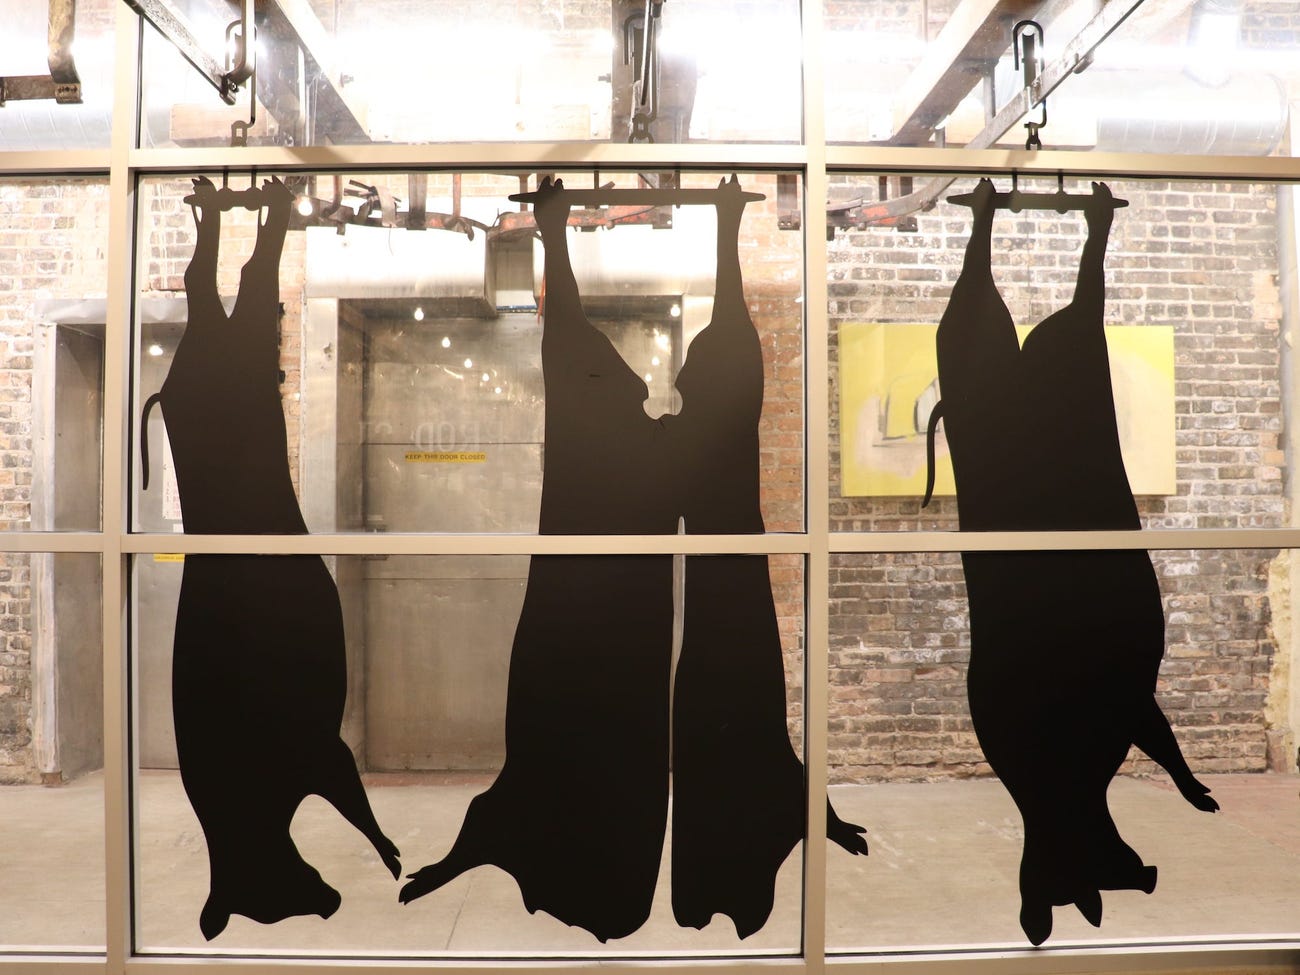 black decals on windows portray cow and pig carcasses hanging by their rear feet on railings for processing